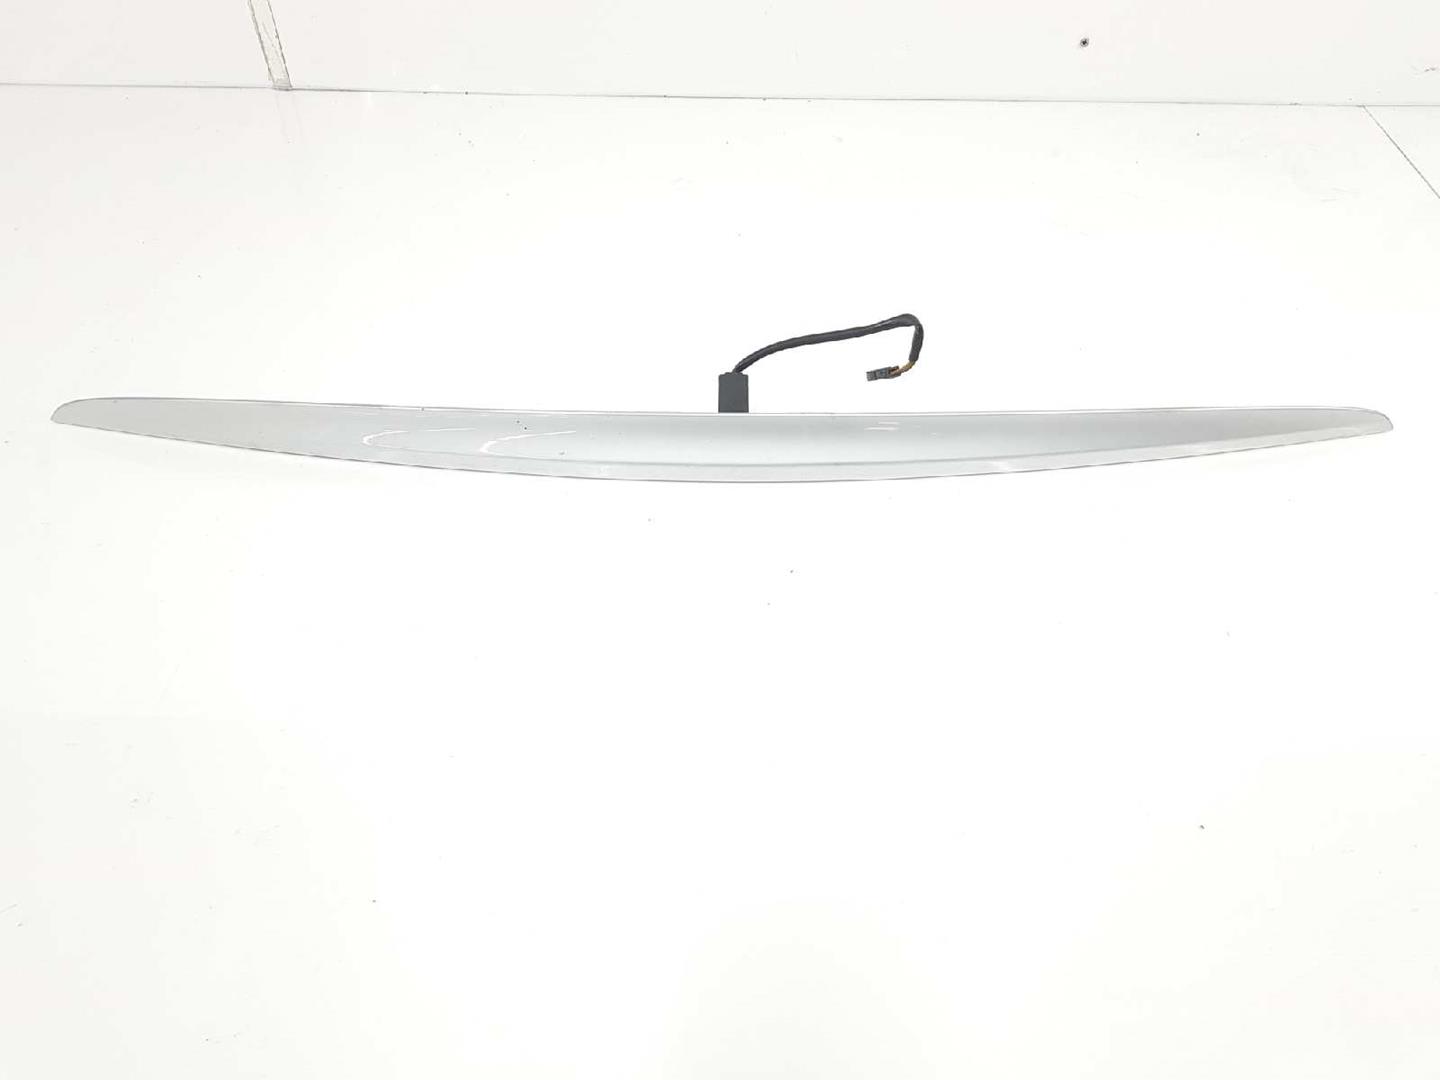 BMW 3 Series E46 (1997-2006) Other Body Parts 41627117996 19711469